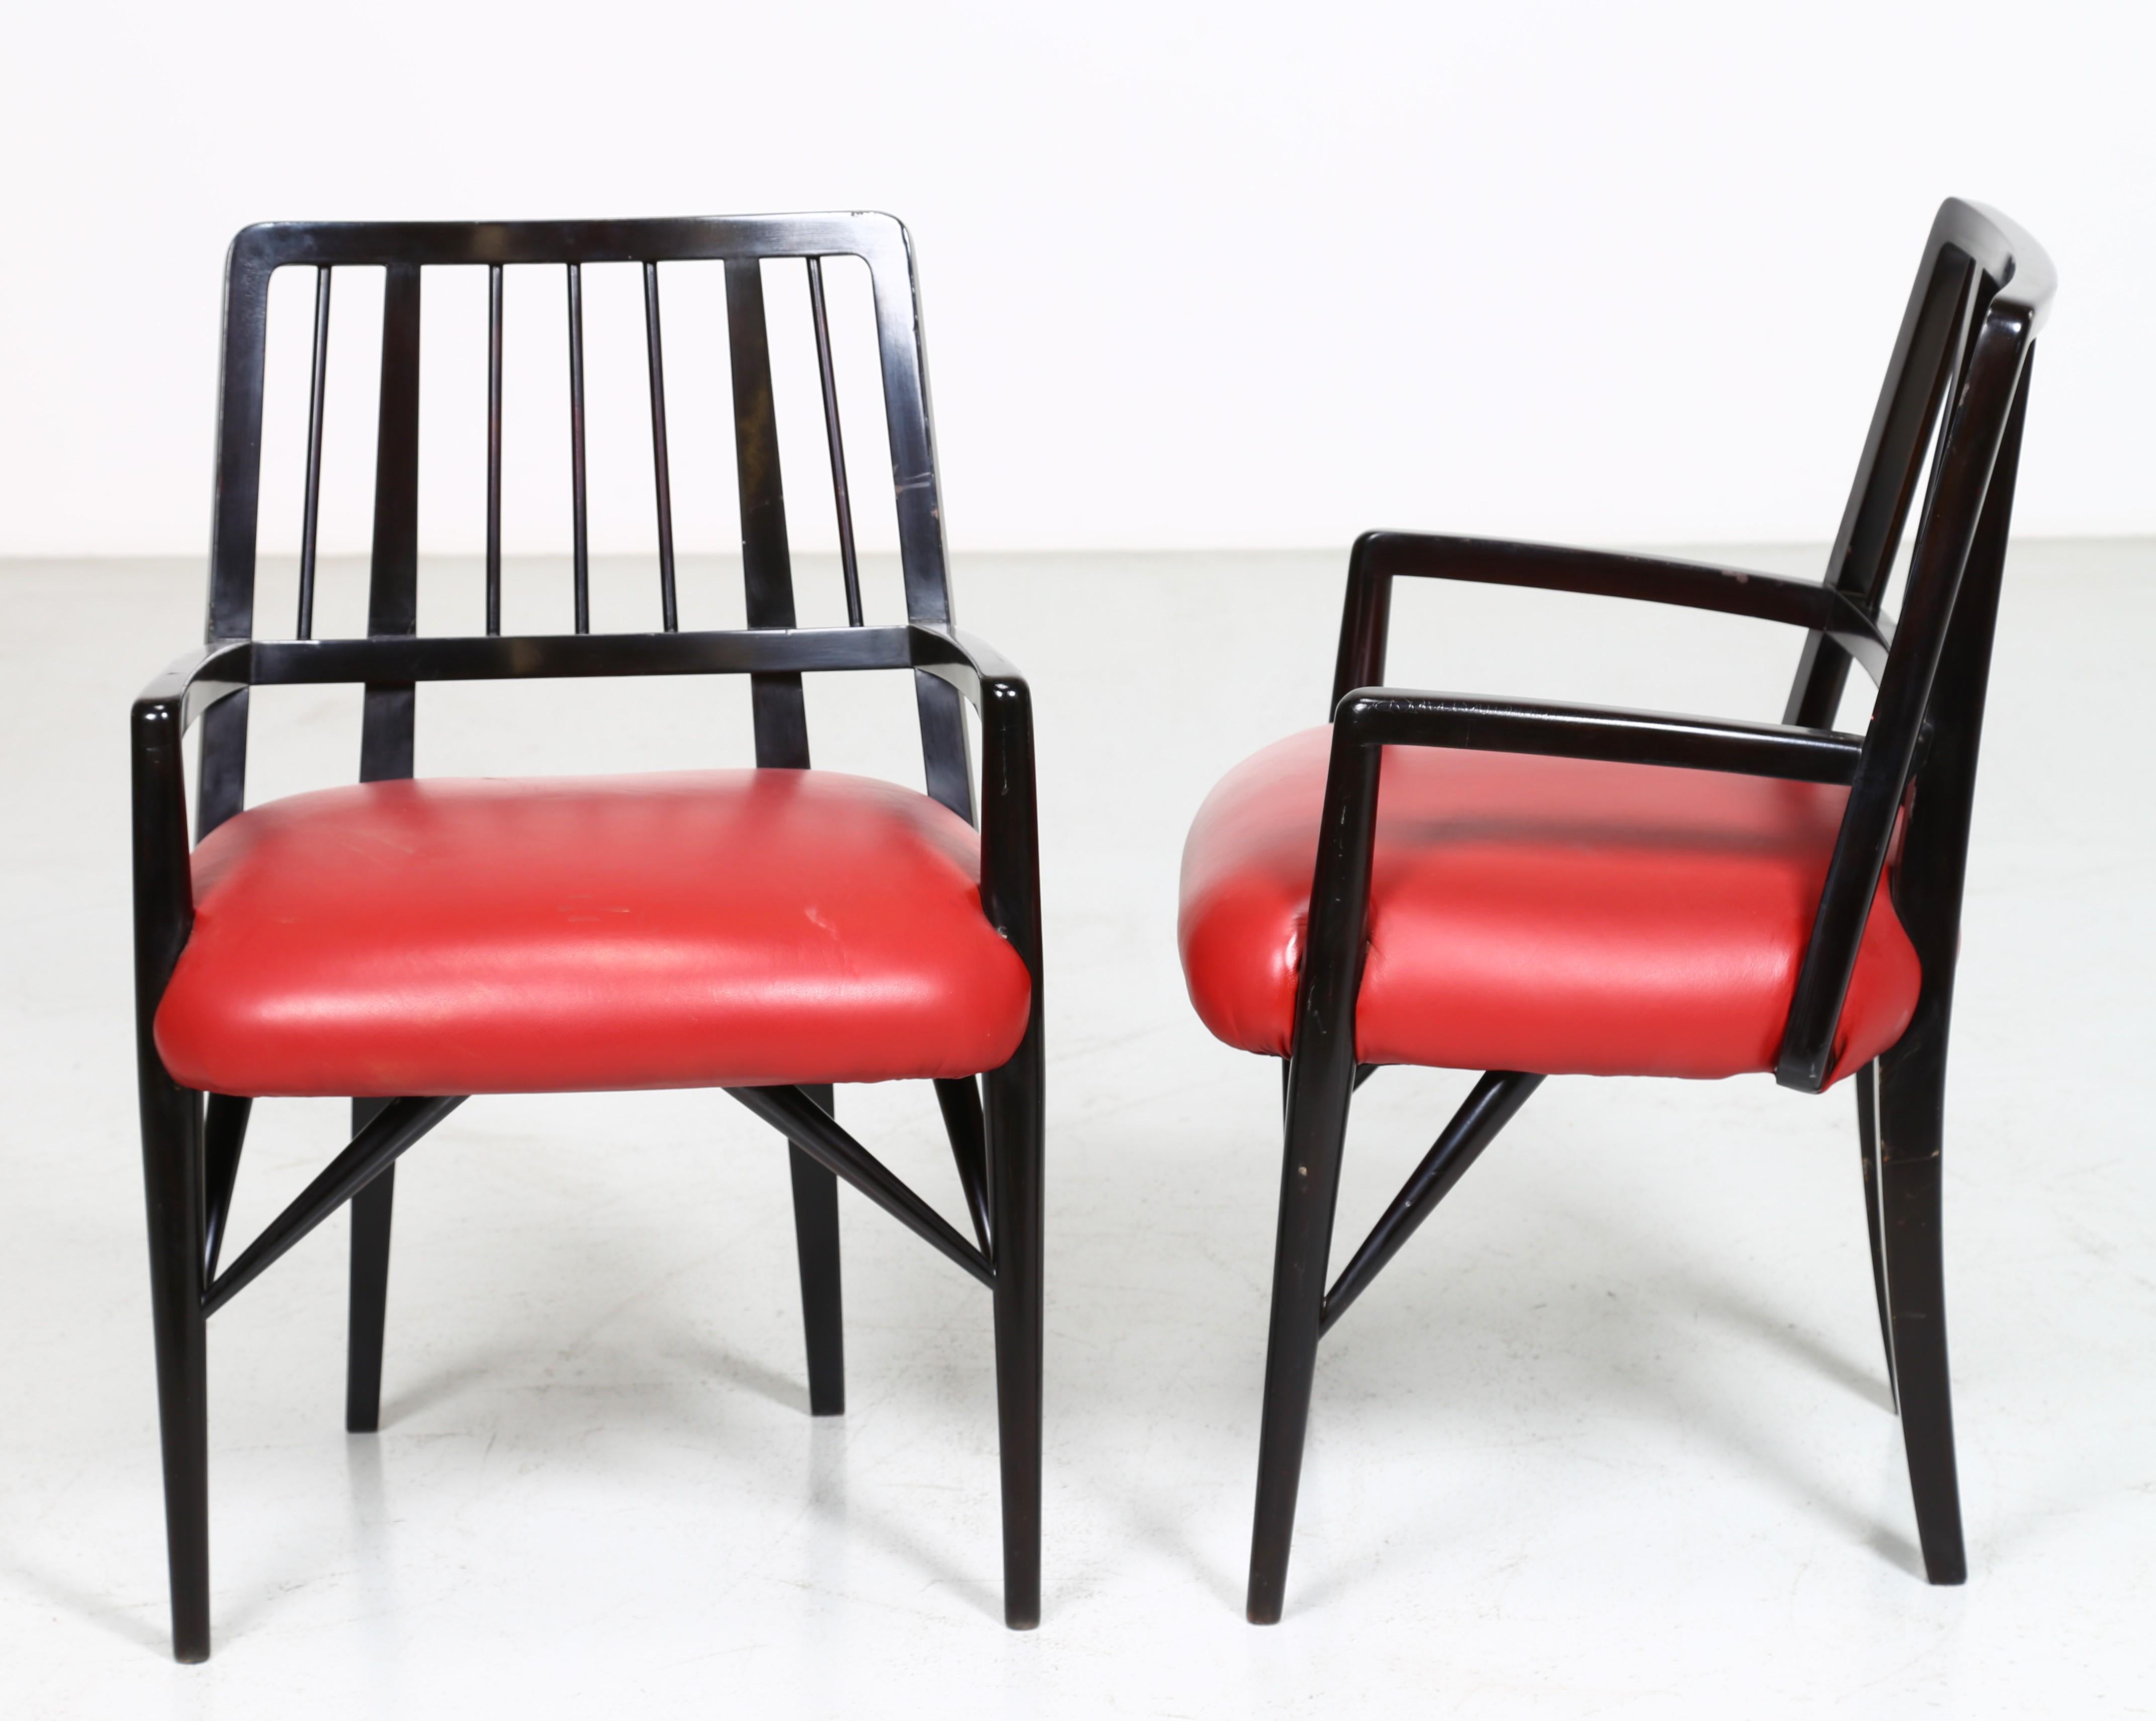 American Paul Laszlo Set Chairs in Black Lacquered Wood, 1950s